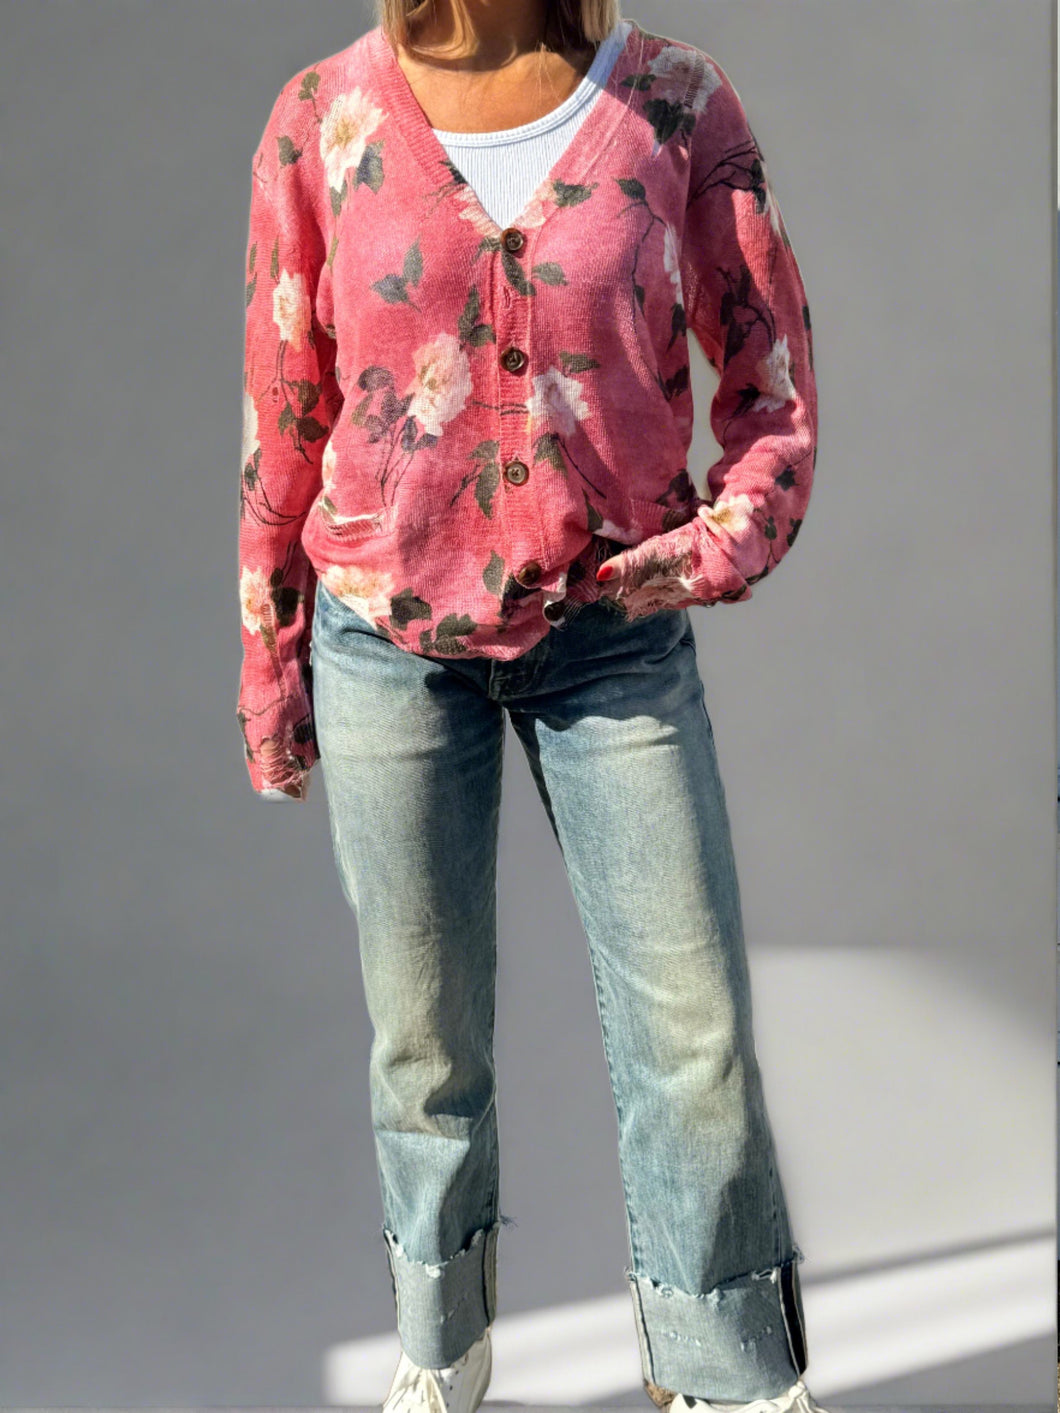 r13 cuffed Romeo jeans and distressed pink flowered boyfriend cardigan at west2westport.com